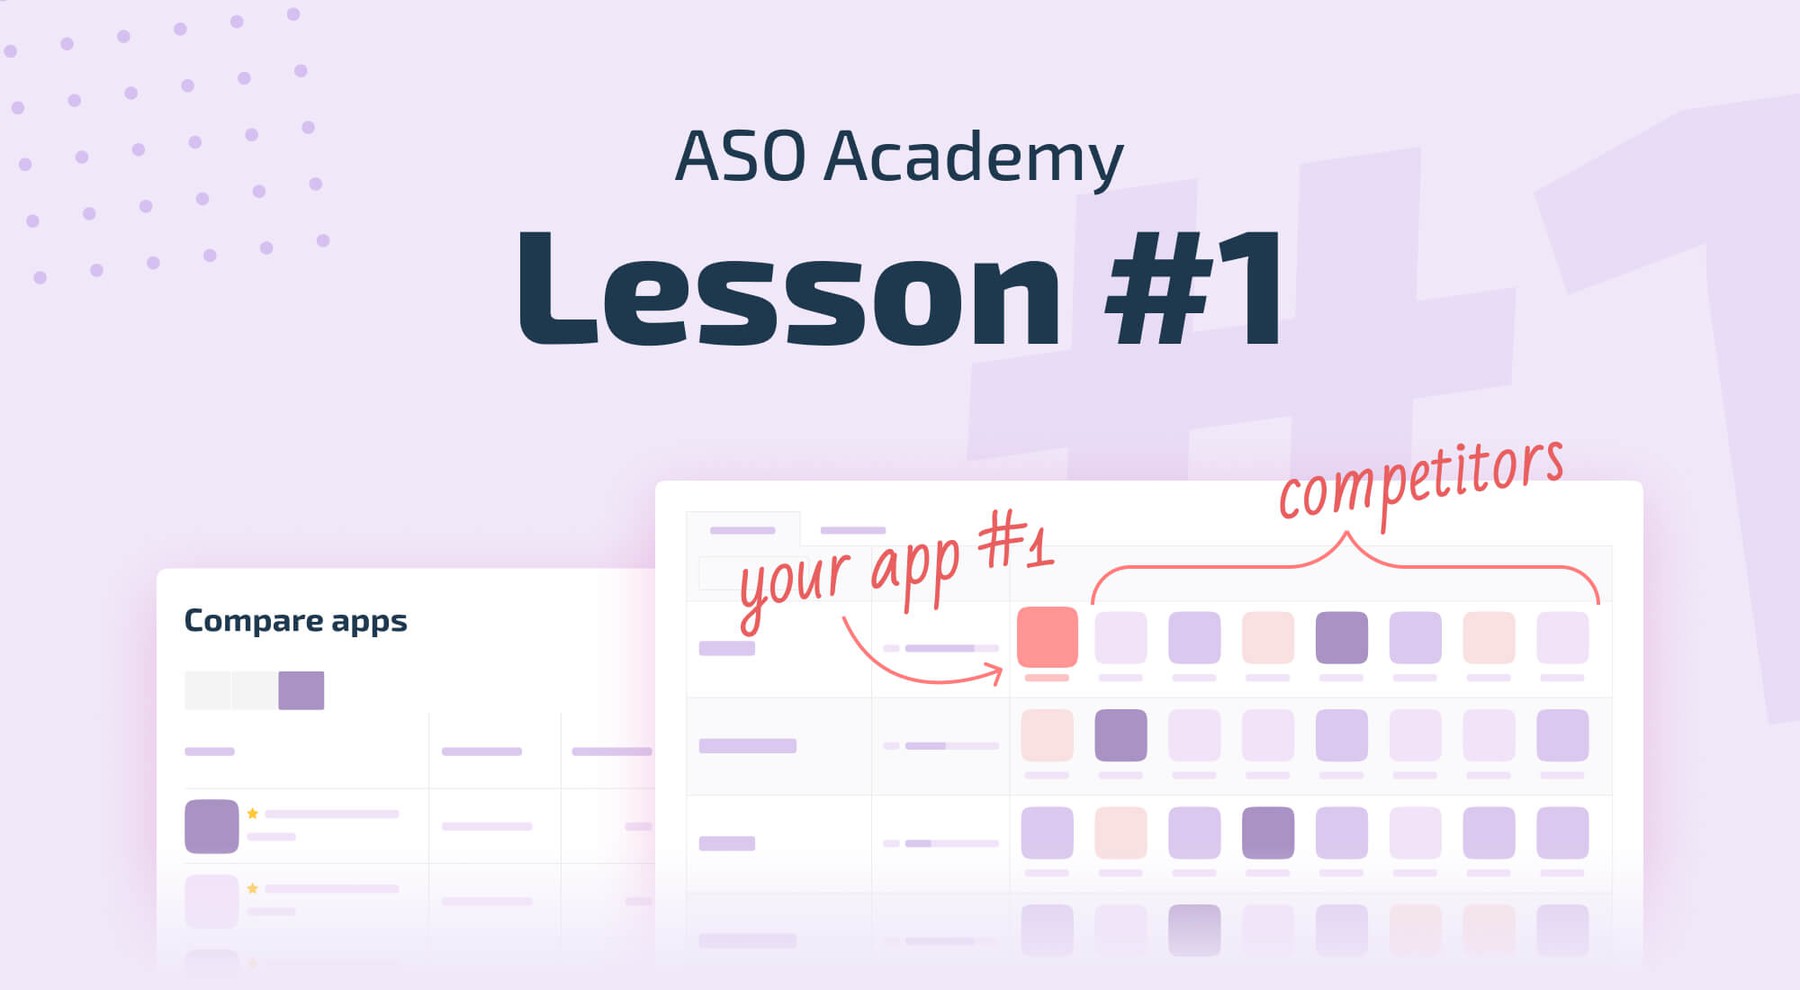 ASO Competitor Analysis: Understand how to approach ASO by looking at the competition